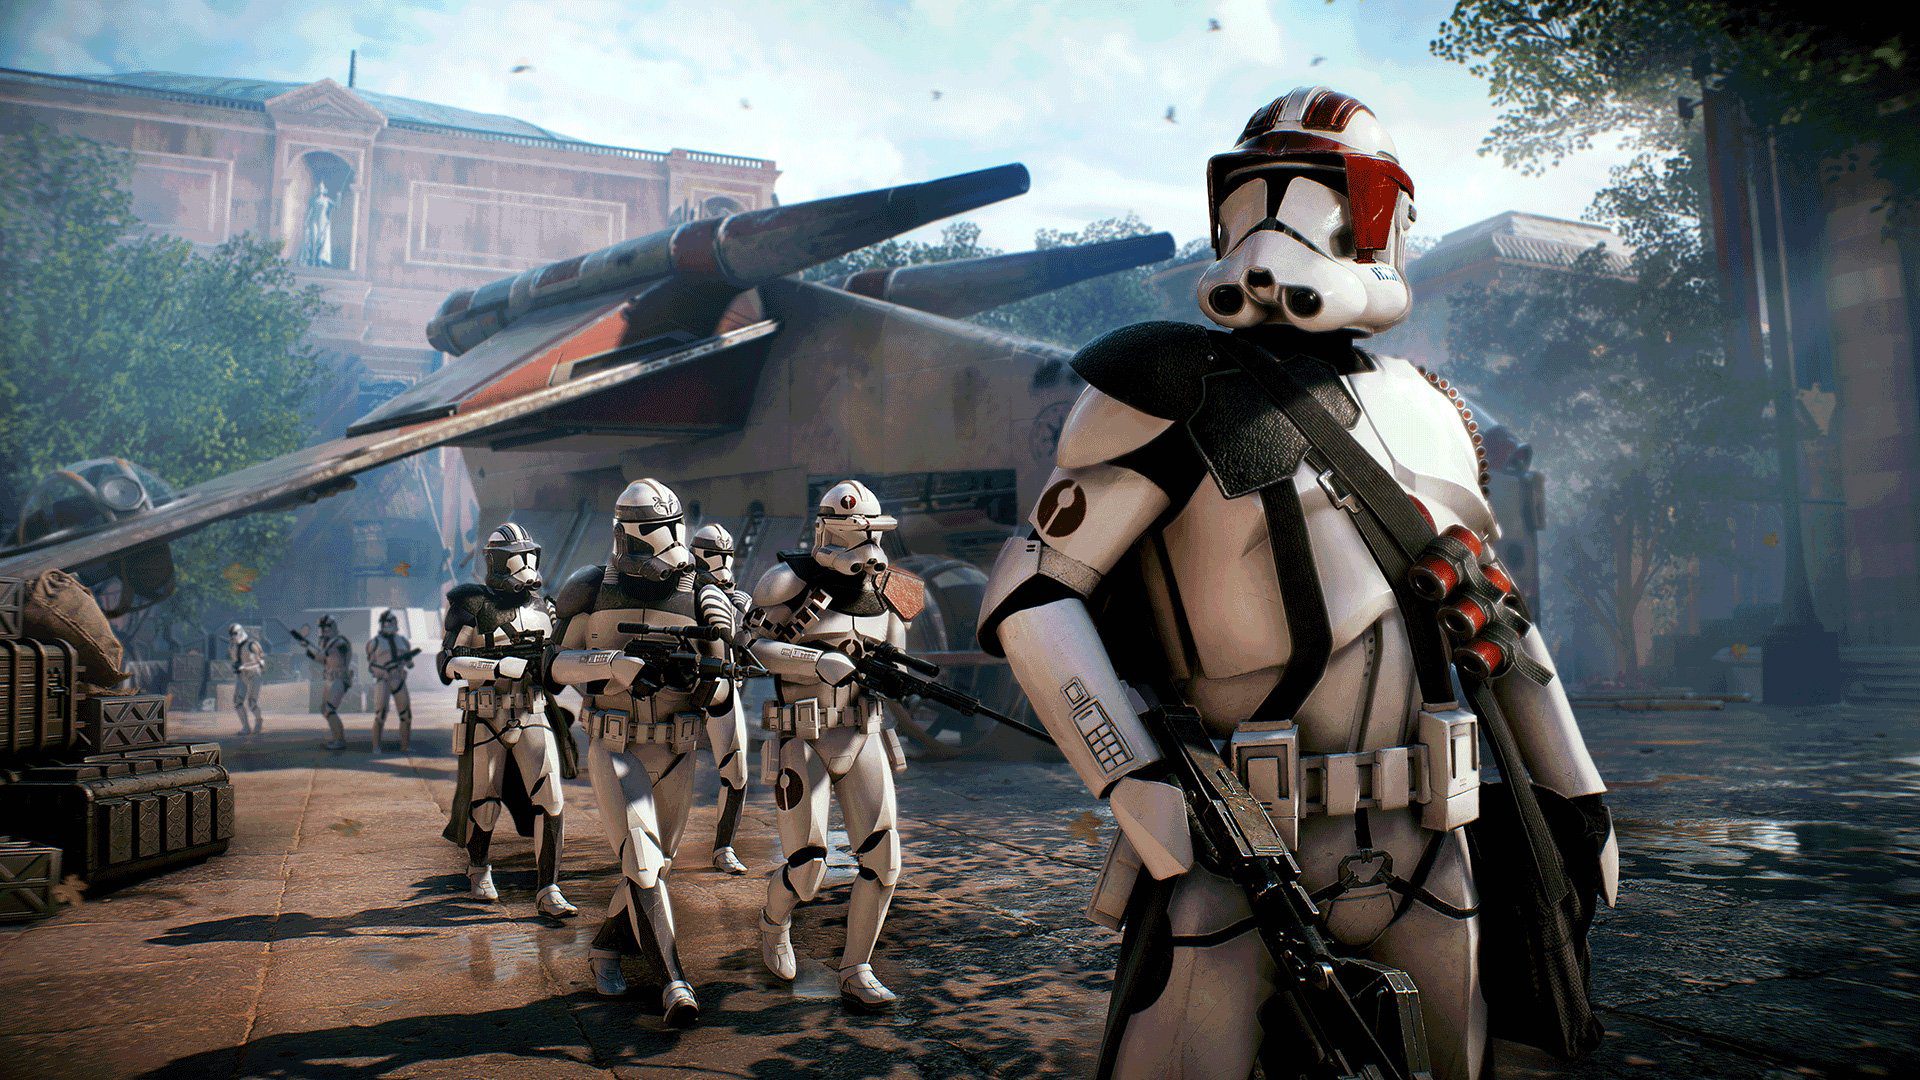 Star Wars Battlefront 2' is free on the Epic Games Store this week